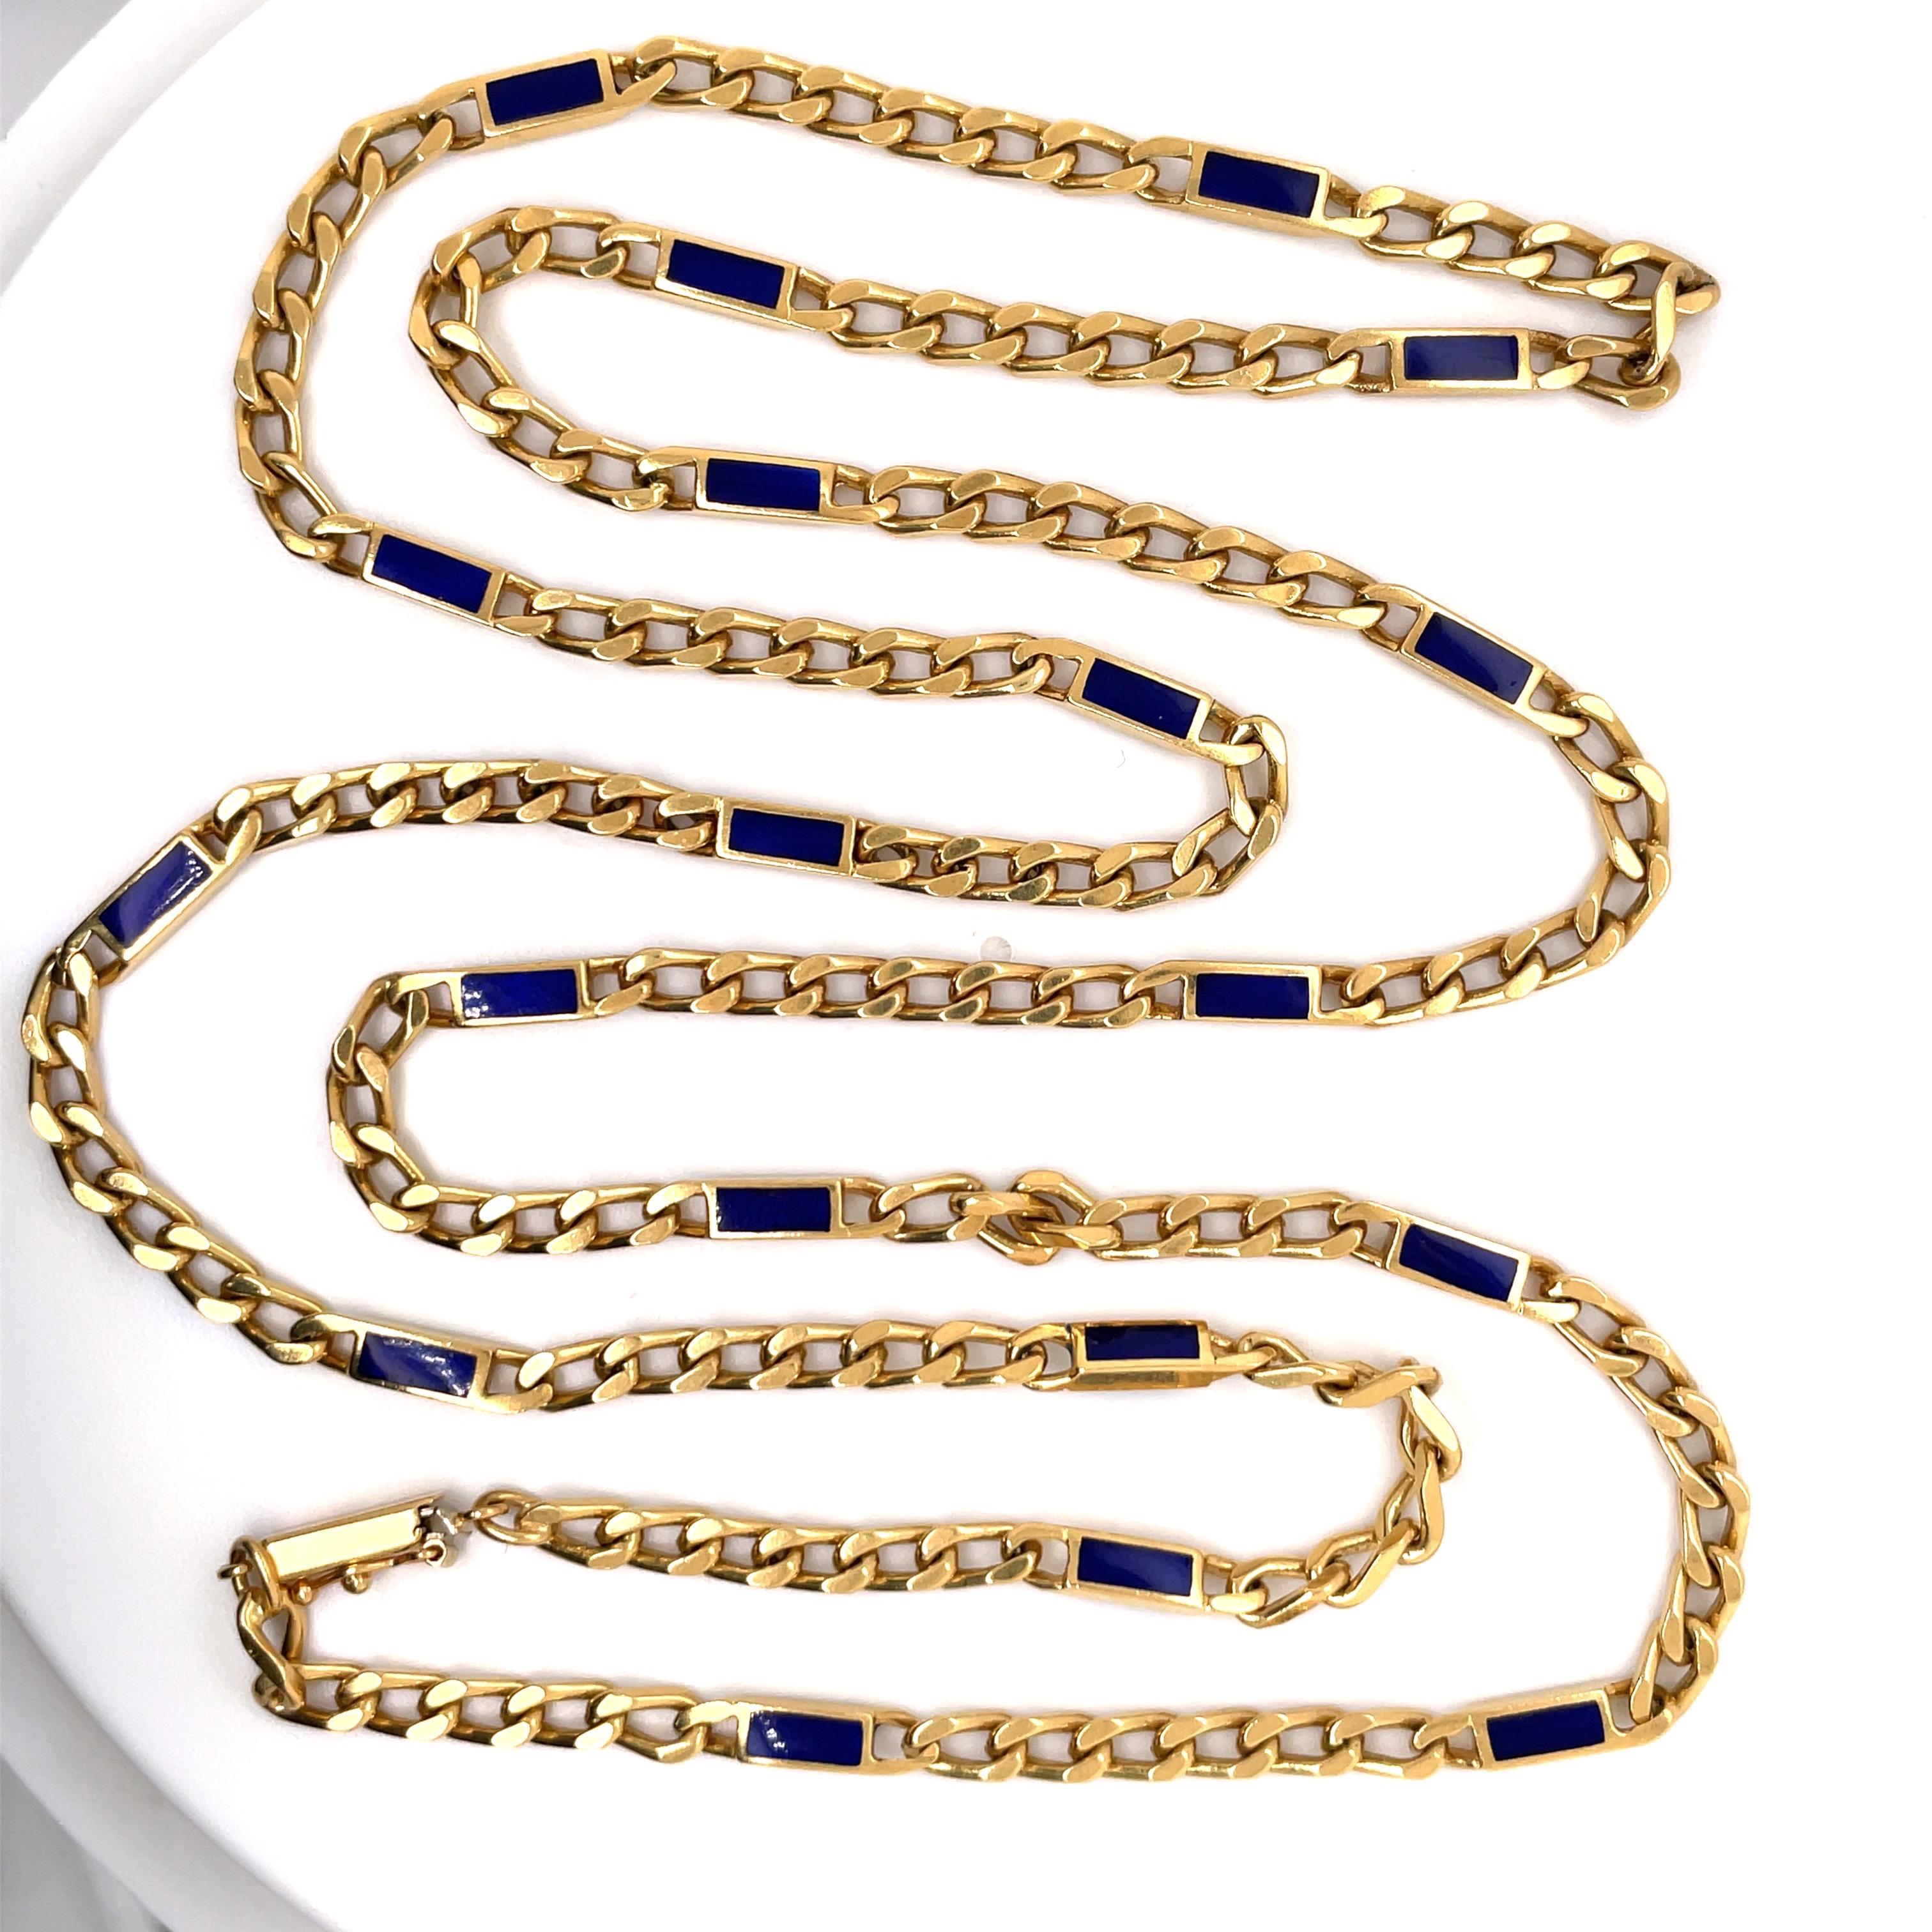 18 Karat Yellow Gold necklace featuring Lapis Bar links on a Cuban link chain, weighing 72.9 grams, 37 Inches.
Great for Laying!